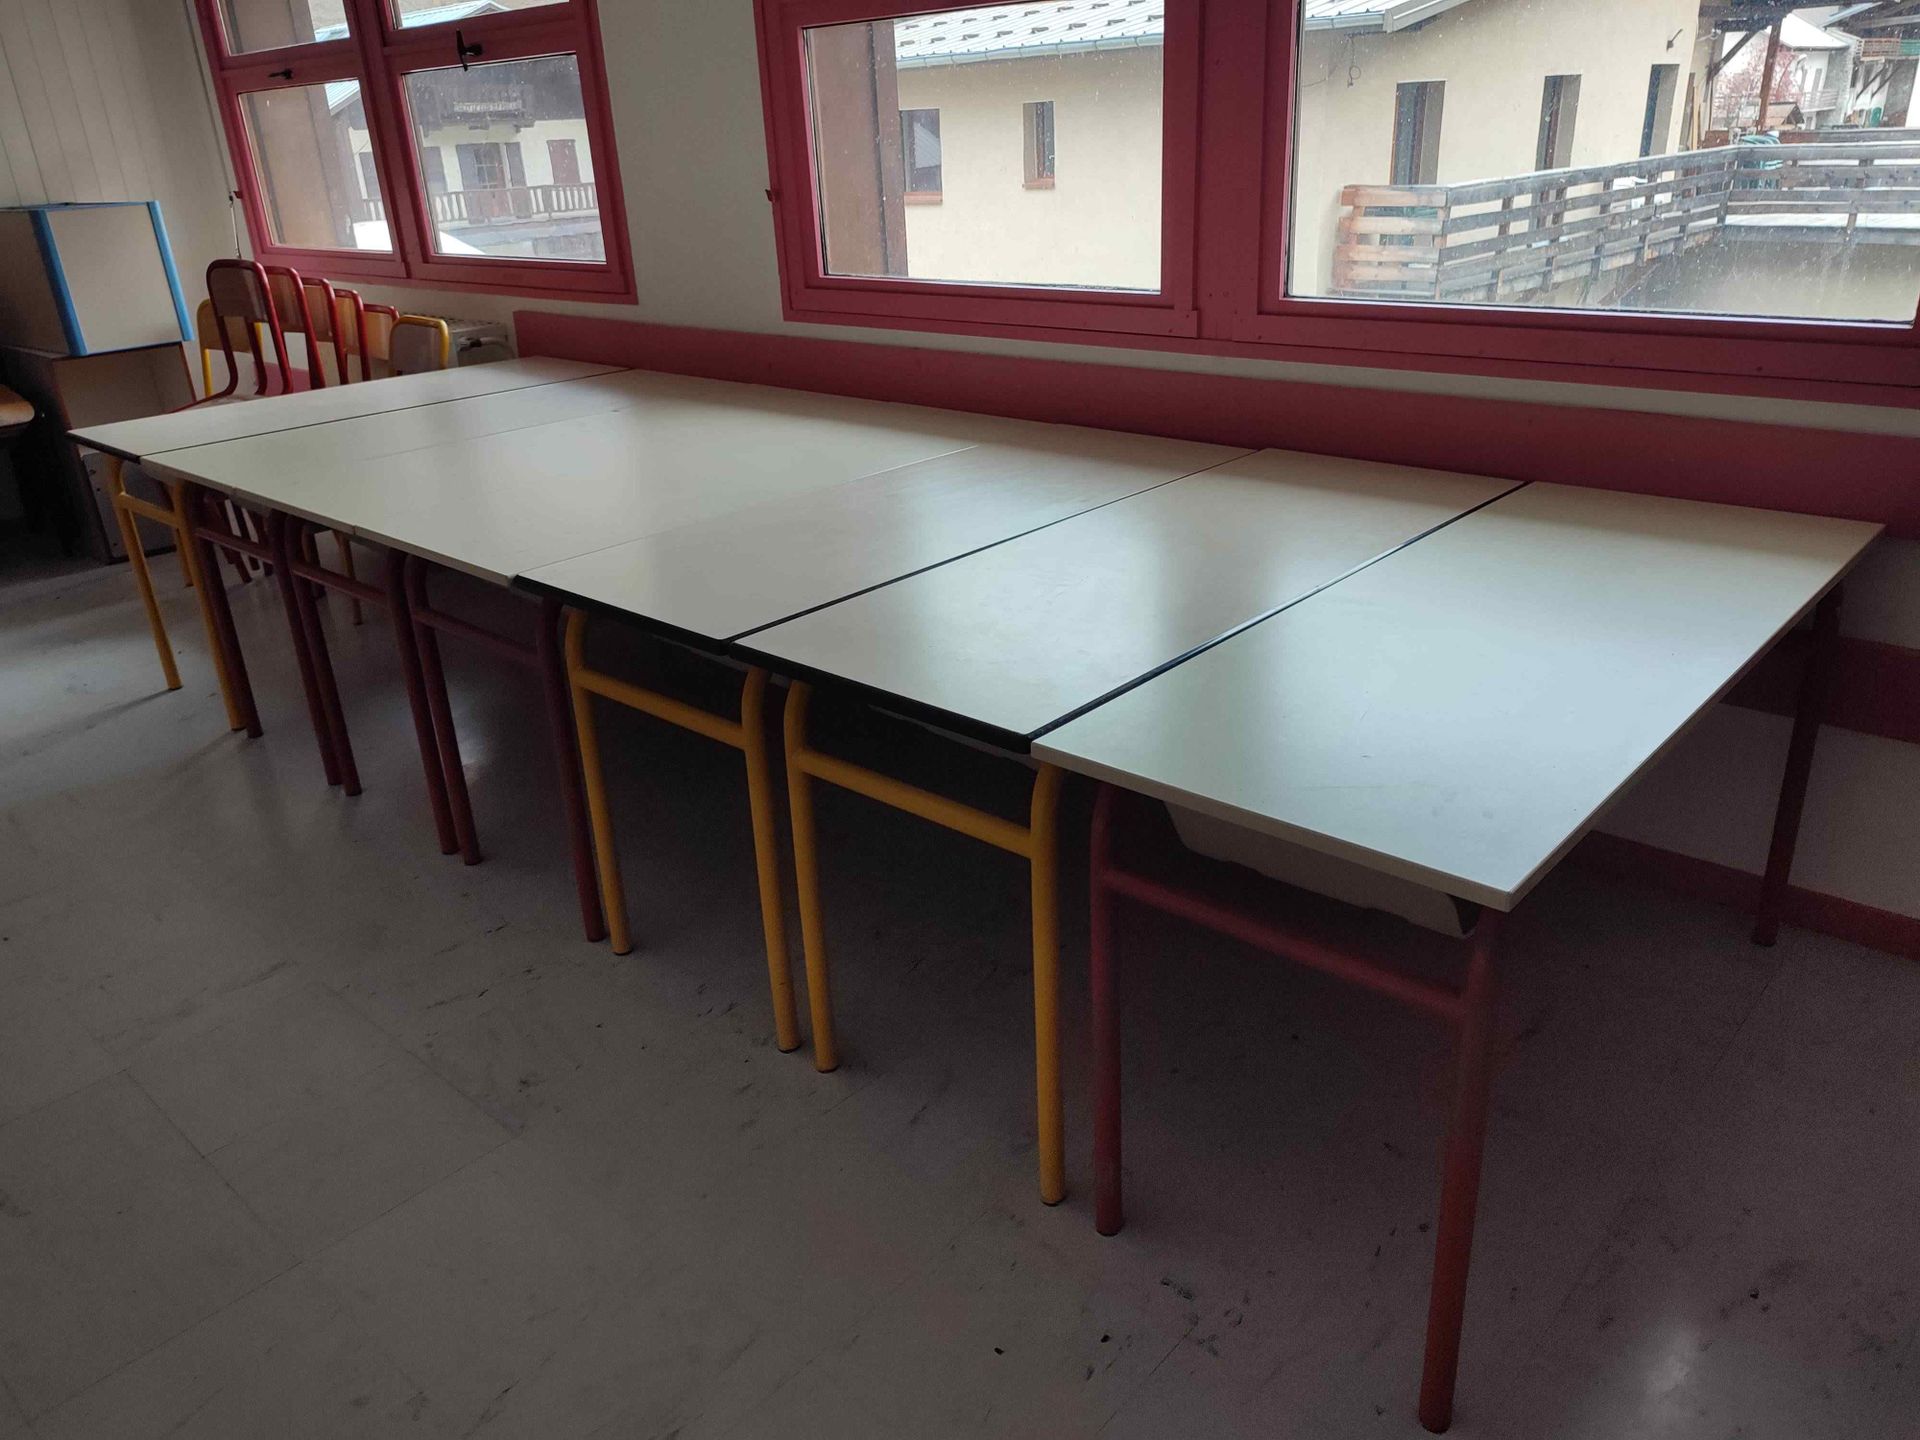 Null Classroom furniture set in used condition including:
- 39 chairs (various m&hellip;